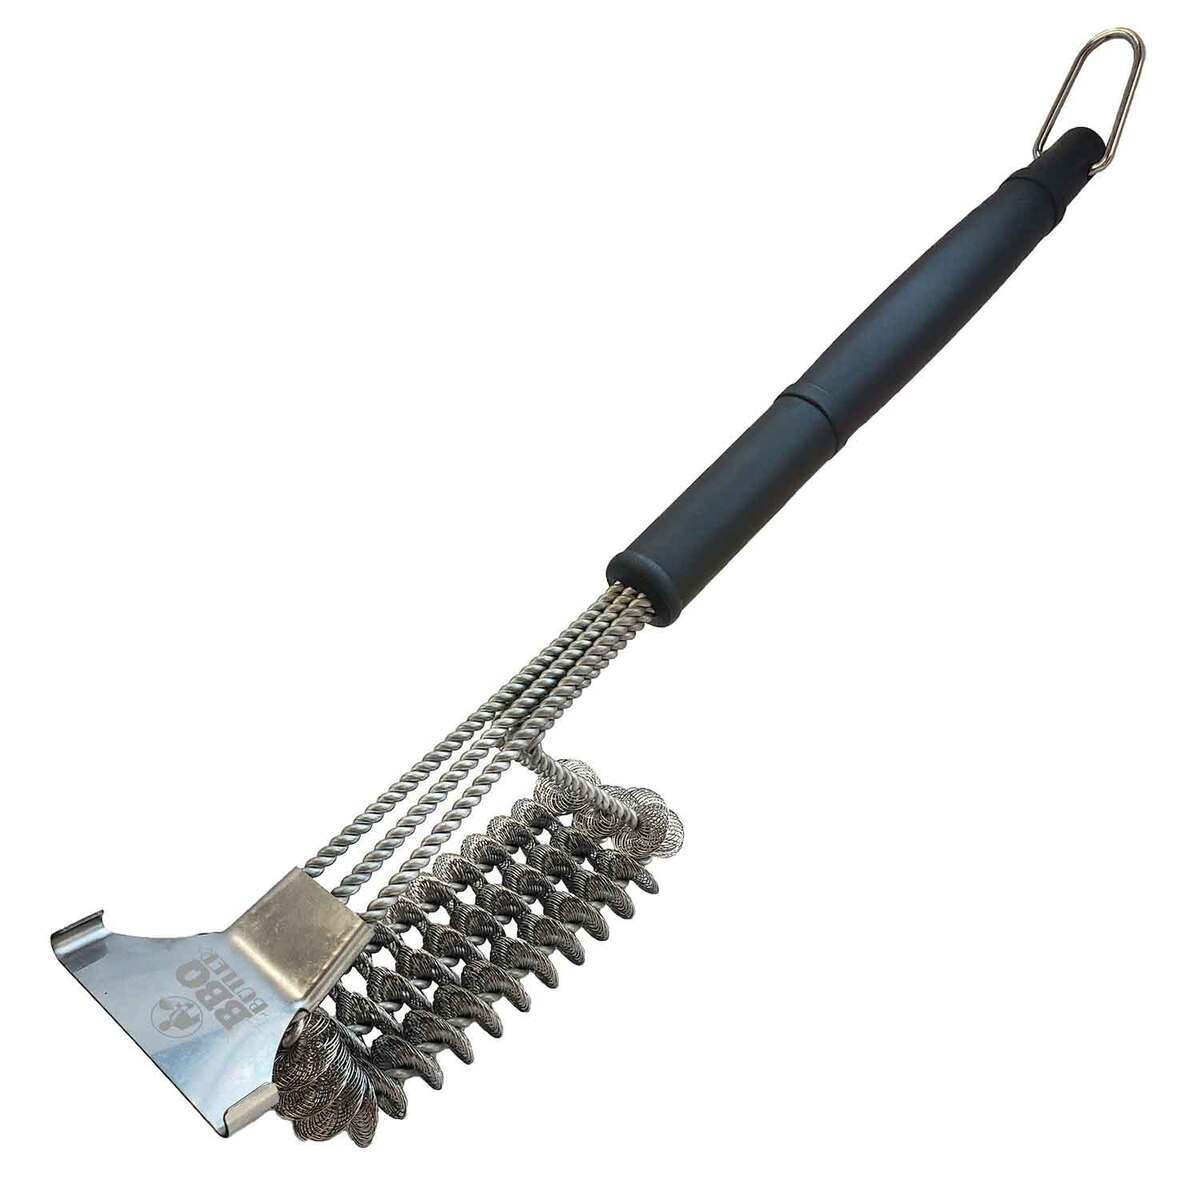 8in Barbecue Oven Grill Brush Kitchen Metal Cleaning BBQ Scraper